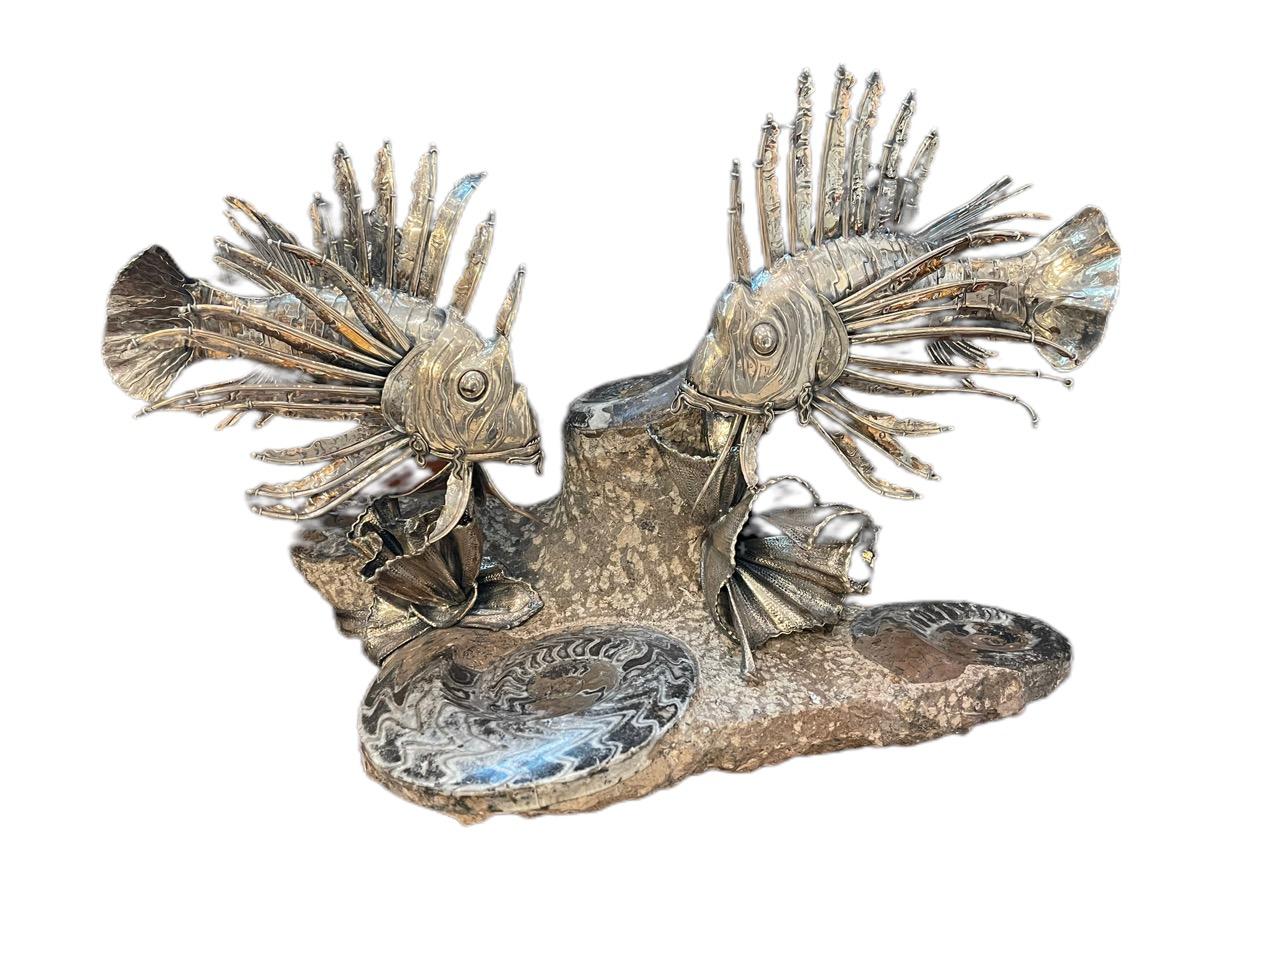 A pair of 20th century, Italian silver Lionfish, by Mario Buccellati from Milan. The realistically modeled fish detachable from the silver seaweed mounted on the fossilized marble base. Buccellatti is recognized as one of the most prestigious